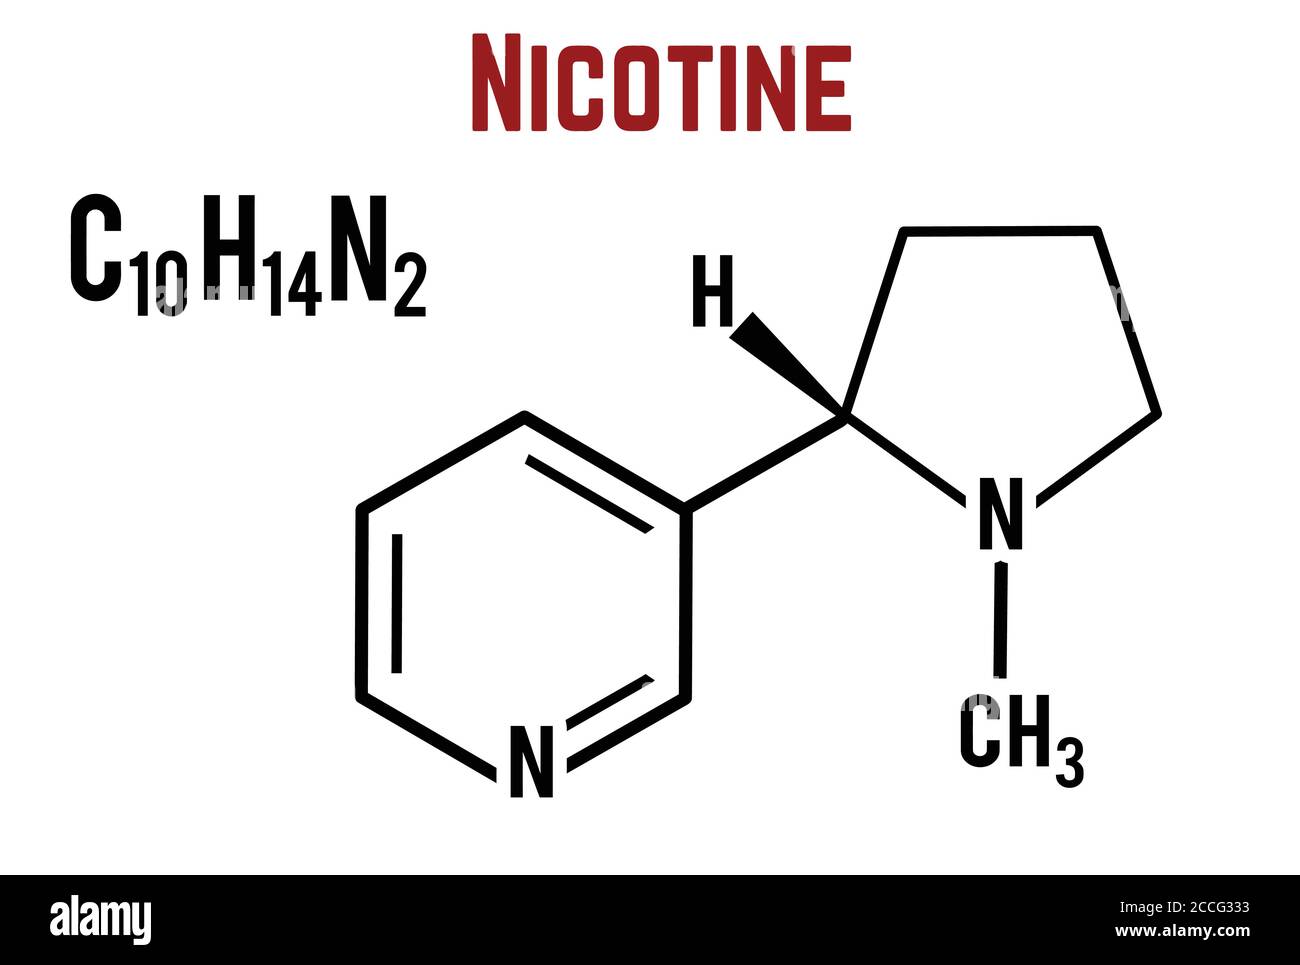 Nicotine molecular structural chemical formula on white background, vector illustration Stock Vector